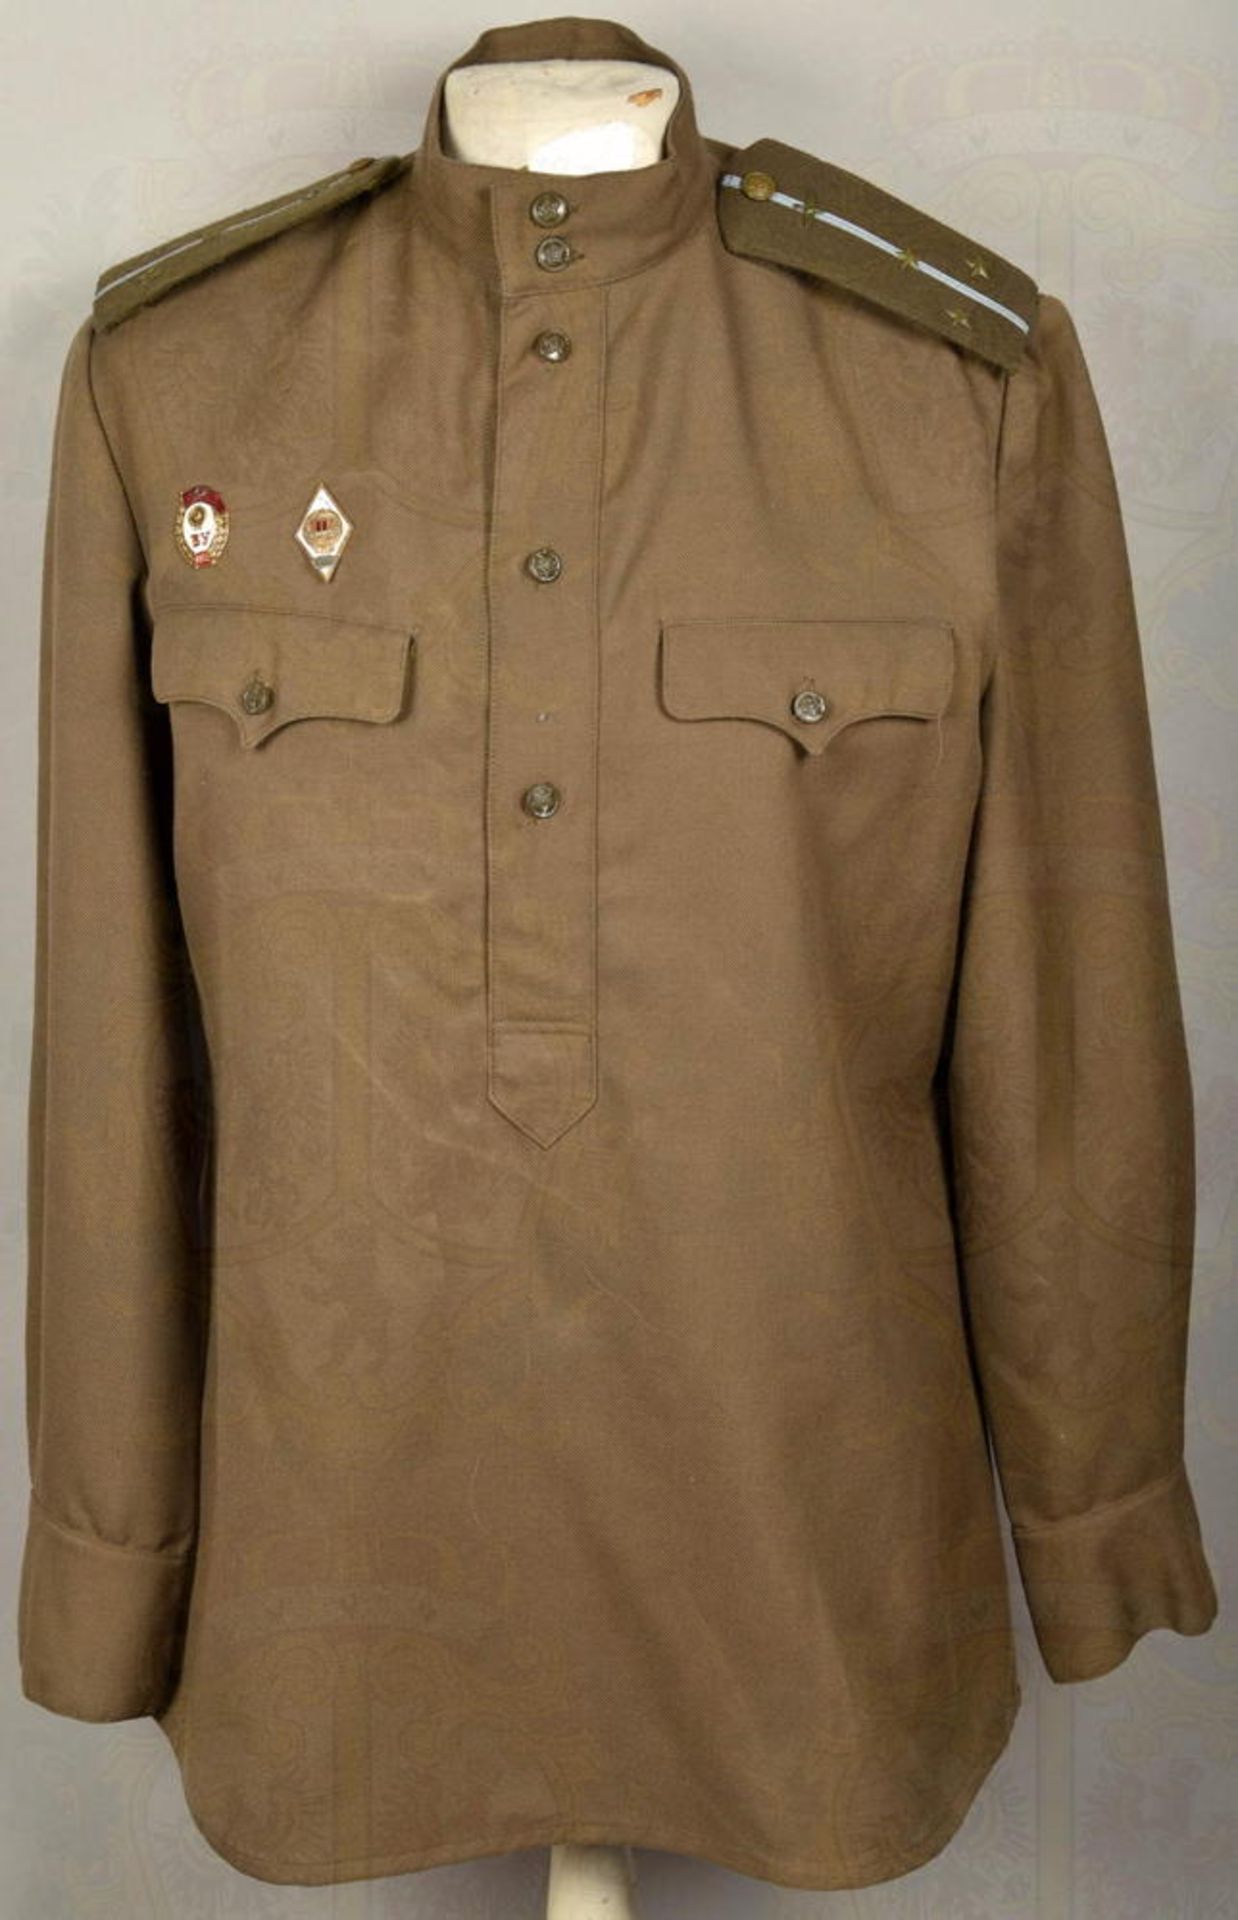 Offiziersbluse Modell 1943 - Image 2 of 5